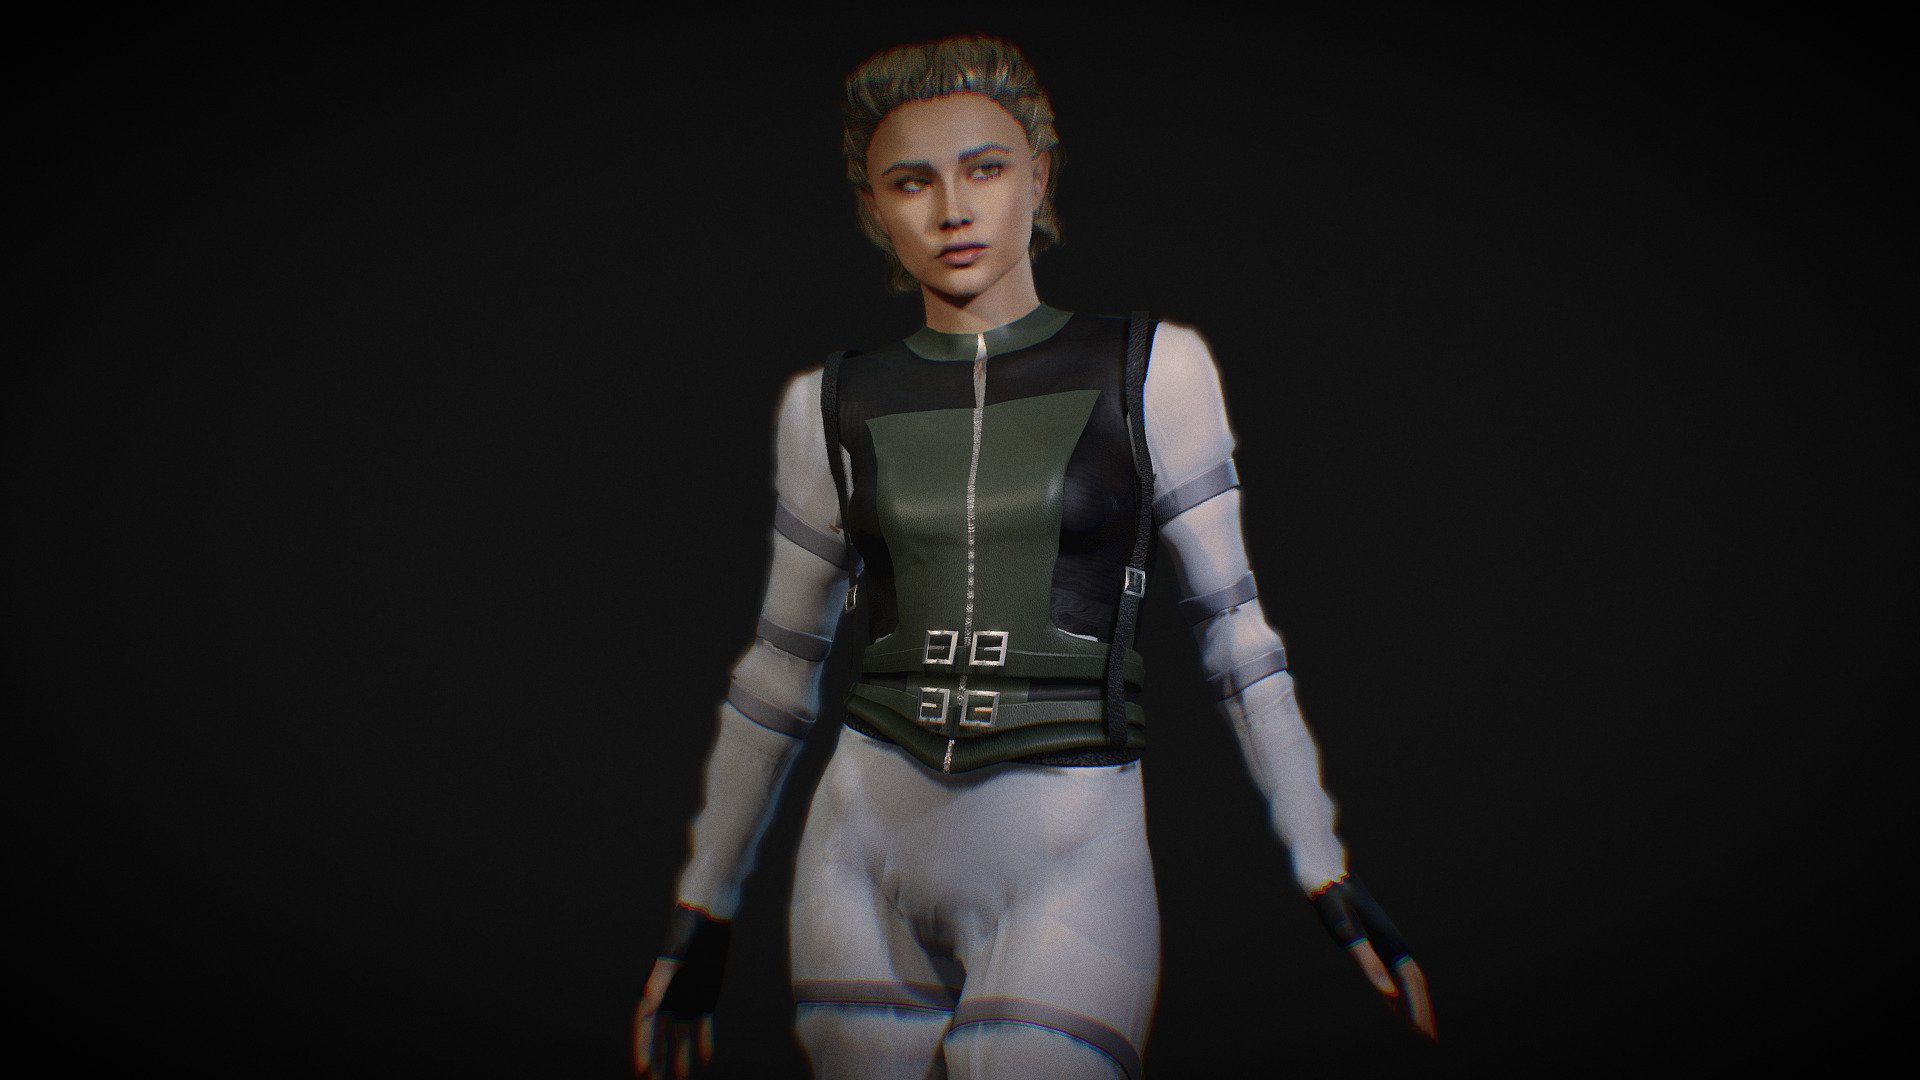 Florence Pugh - Yelena Belova . includes 1 more shapekey for body/face. Model in Blender file. Fully rigged. SSS subsurface scattering. mixamo bone names for animation. No FBX or OBJ format, only Blend file 3d model